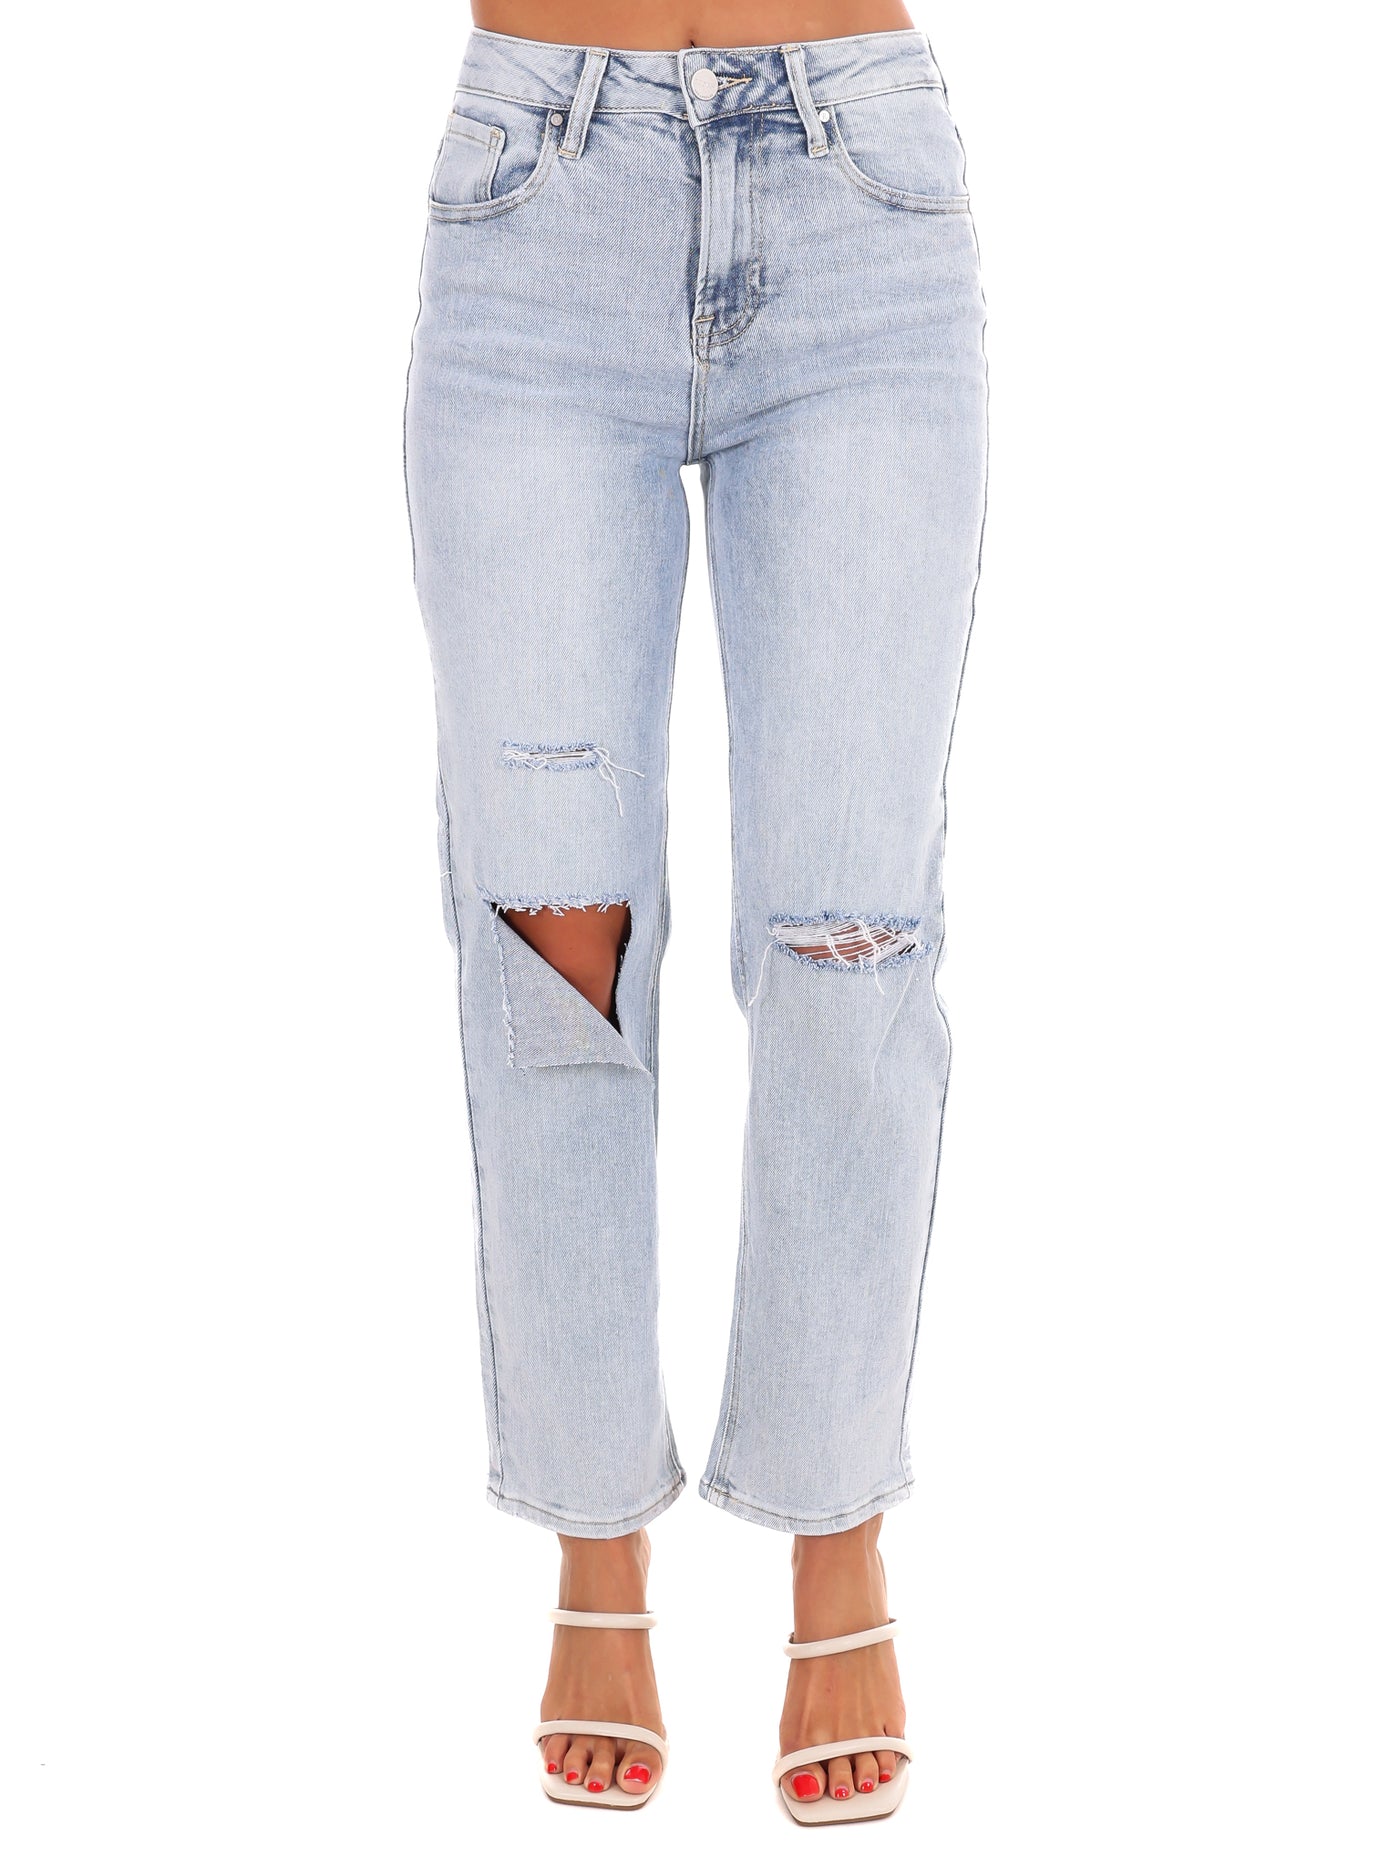 Times Change High Rise Crop Jeans